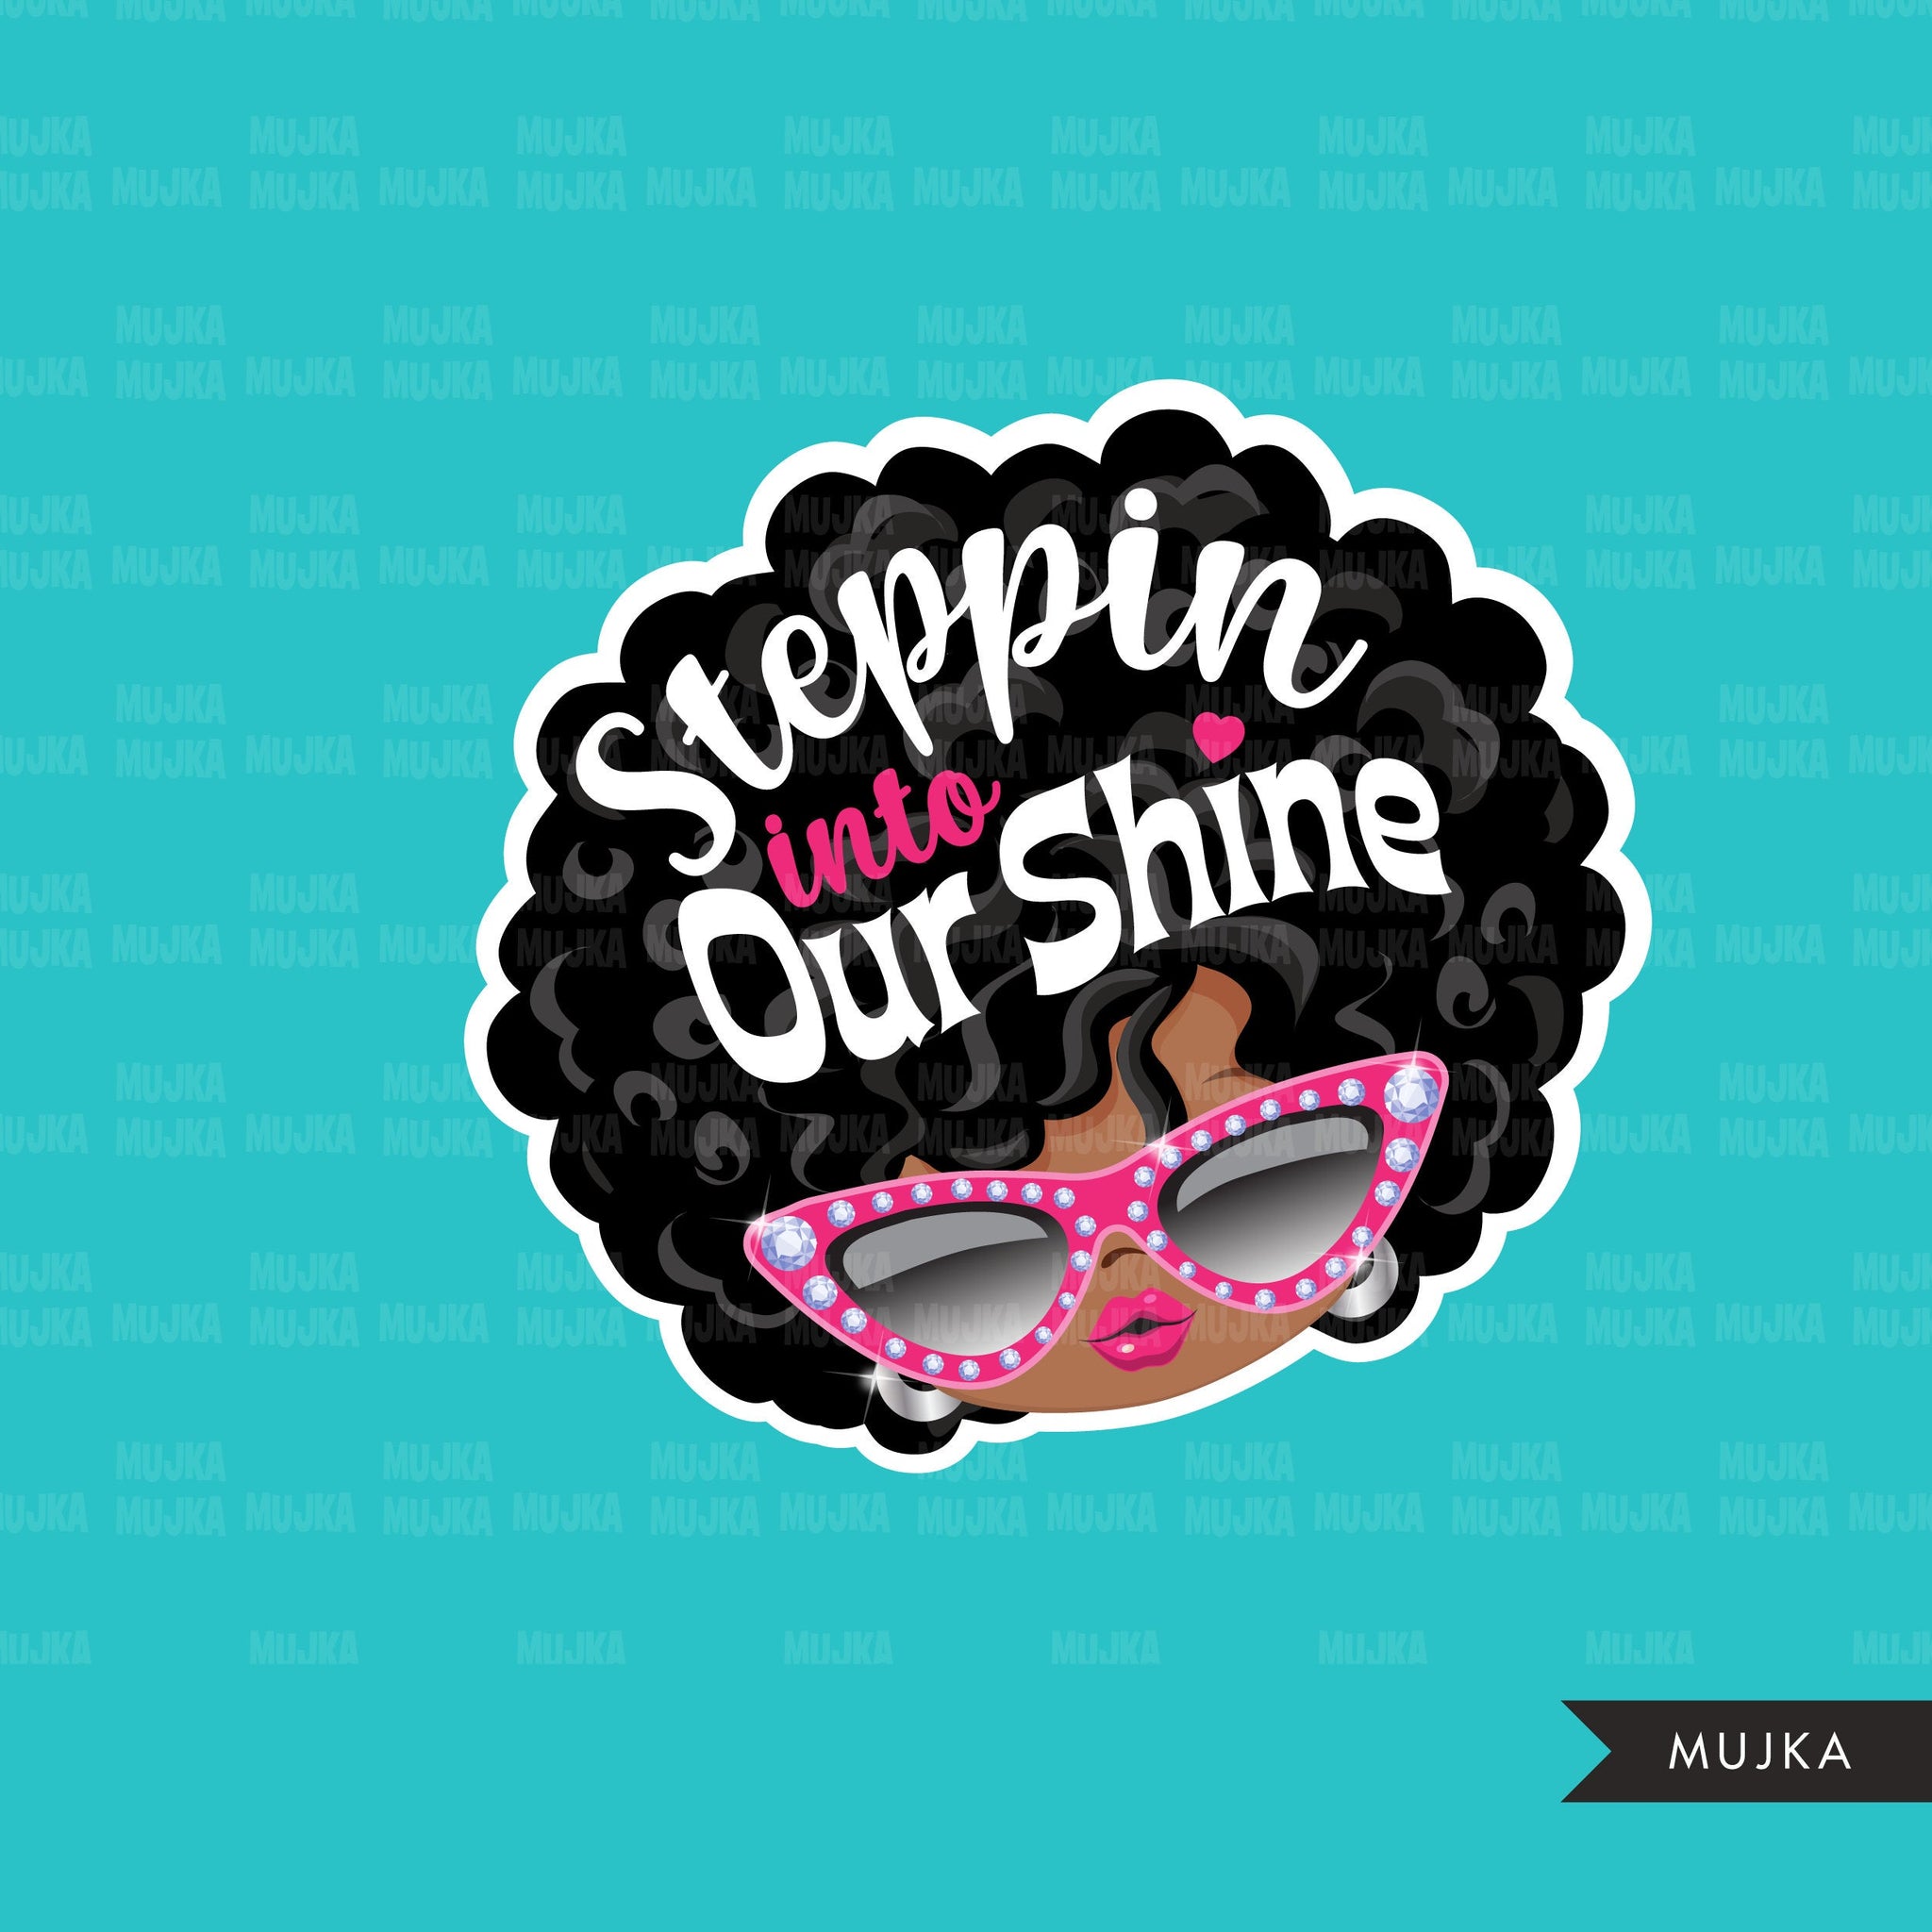 Boss babe clipart, steppin into our shine, sublimation designs digital download, Afro boss babe digital stickers, printable black girls png